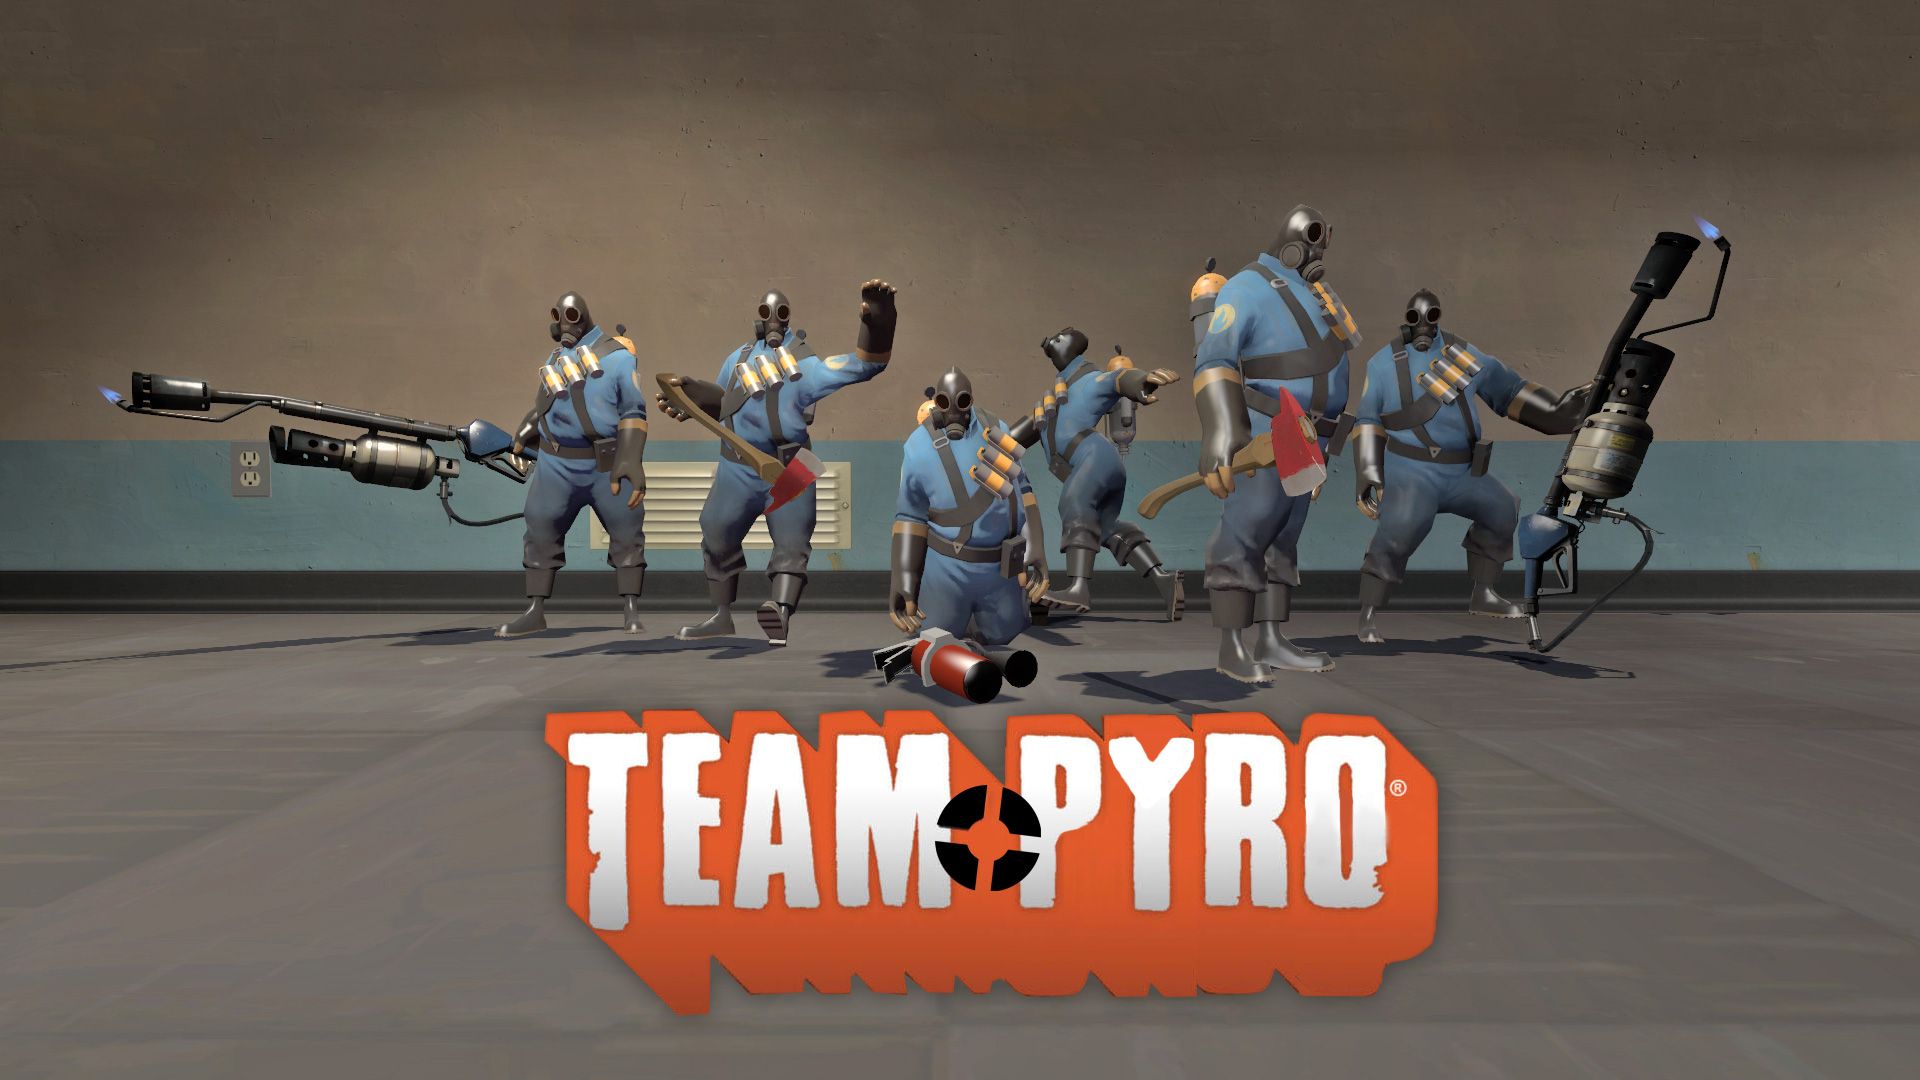 Free download Name 903001 Team Fortress 2 Computer Wallpaper